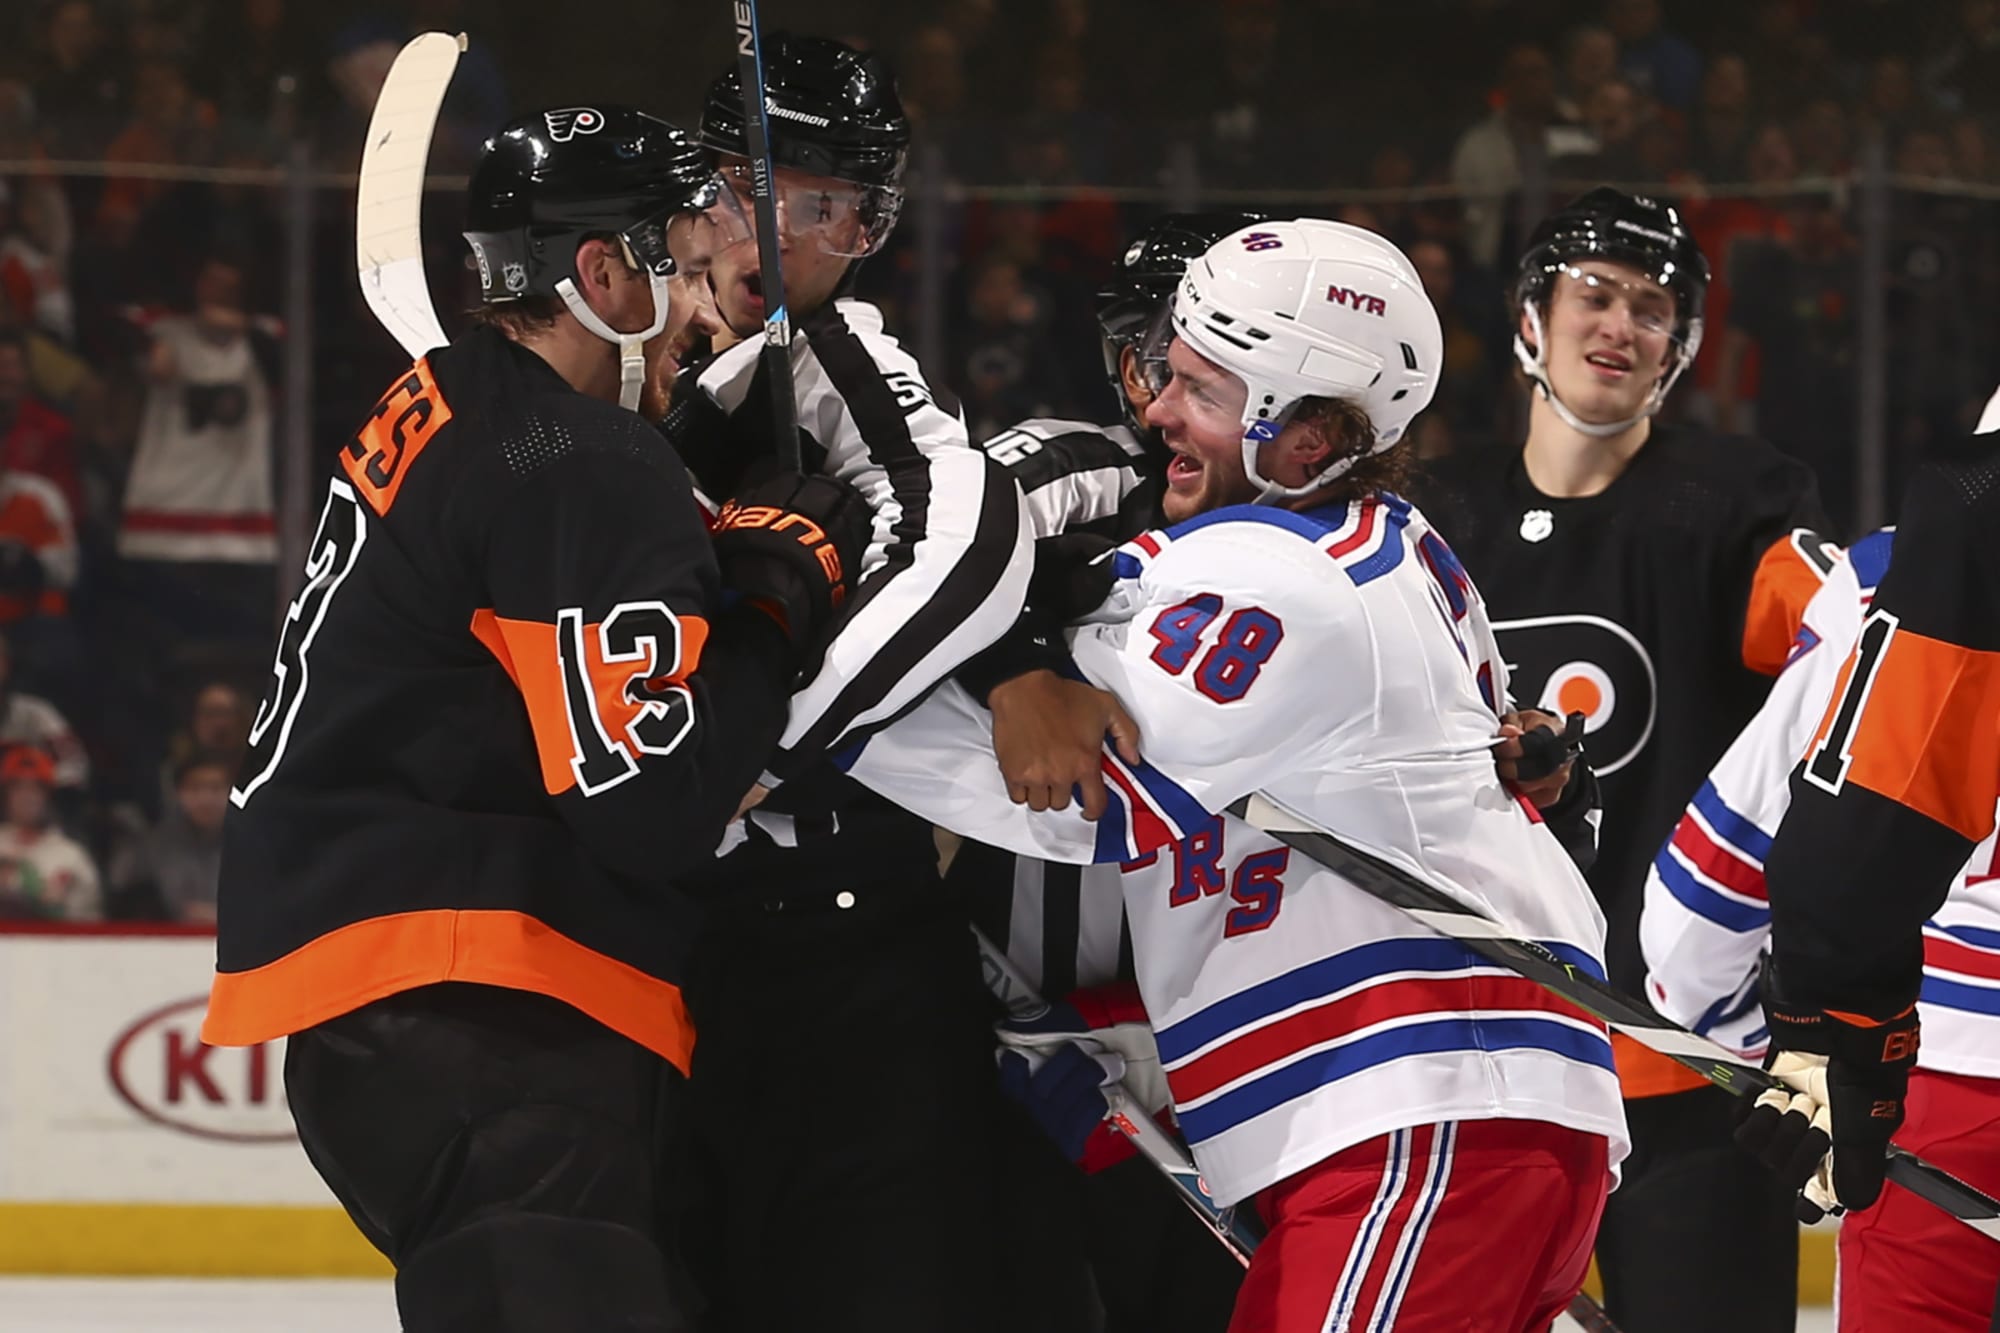 New York Rangers vs Flyers Join the live conversation!